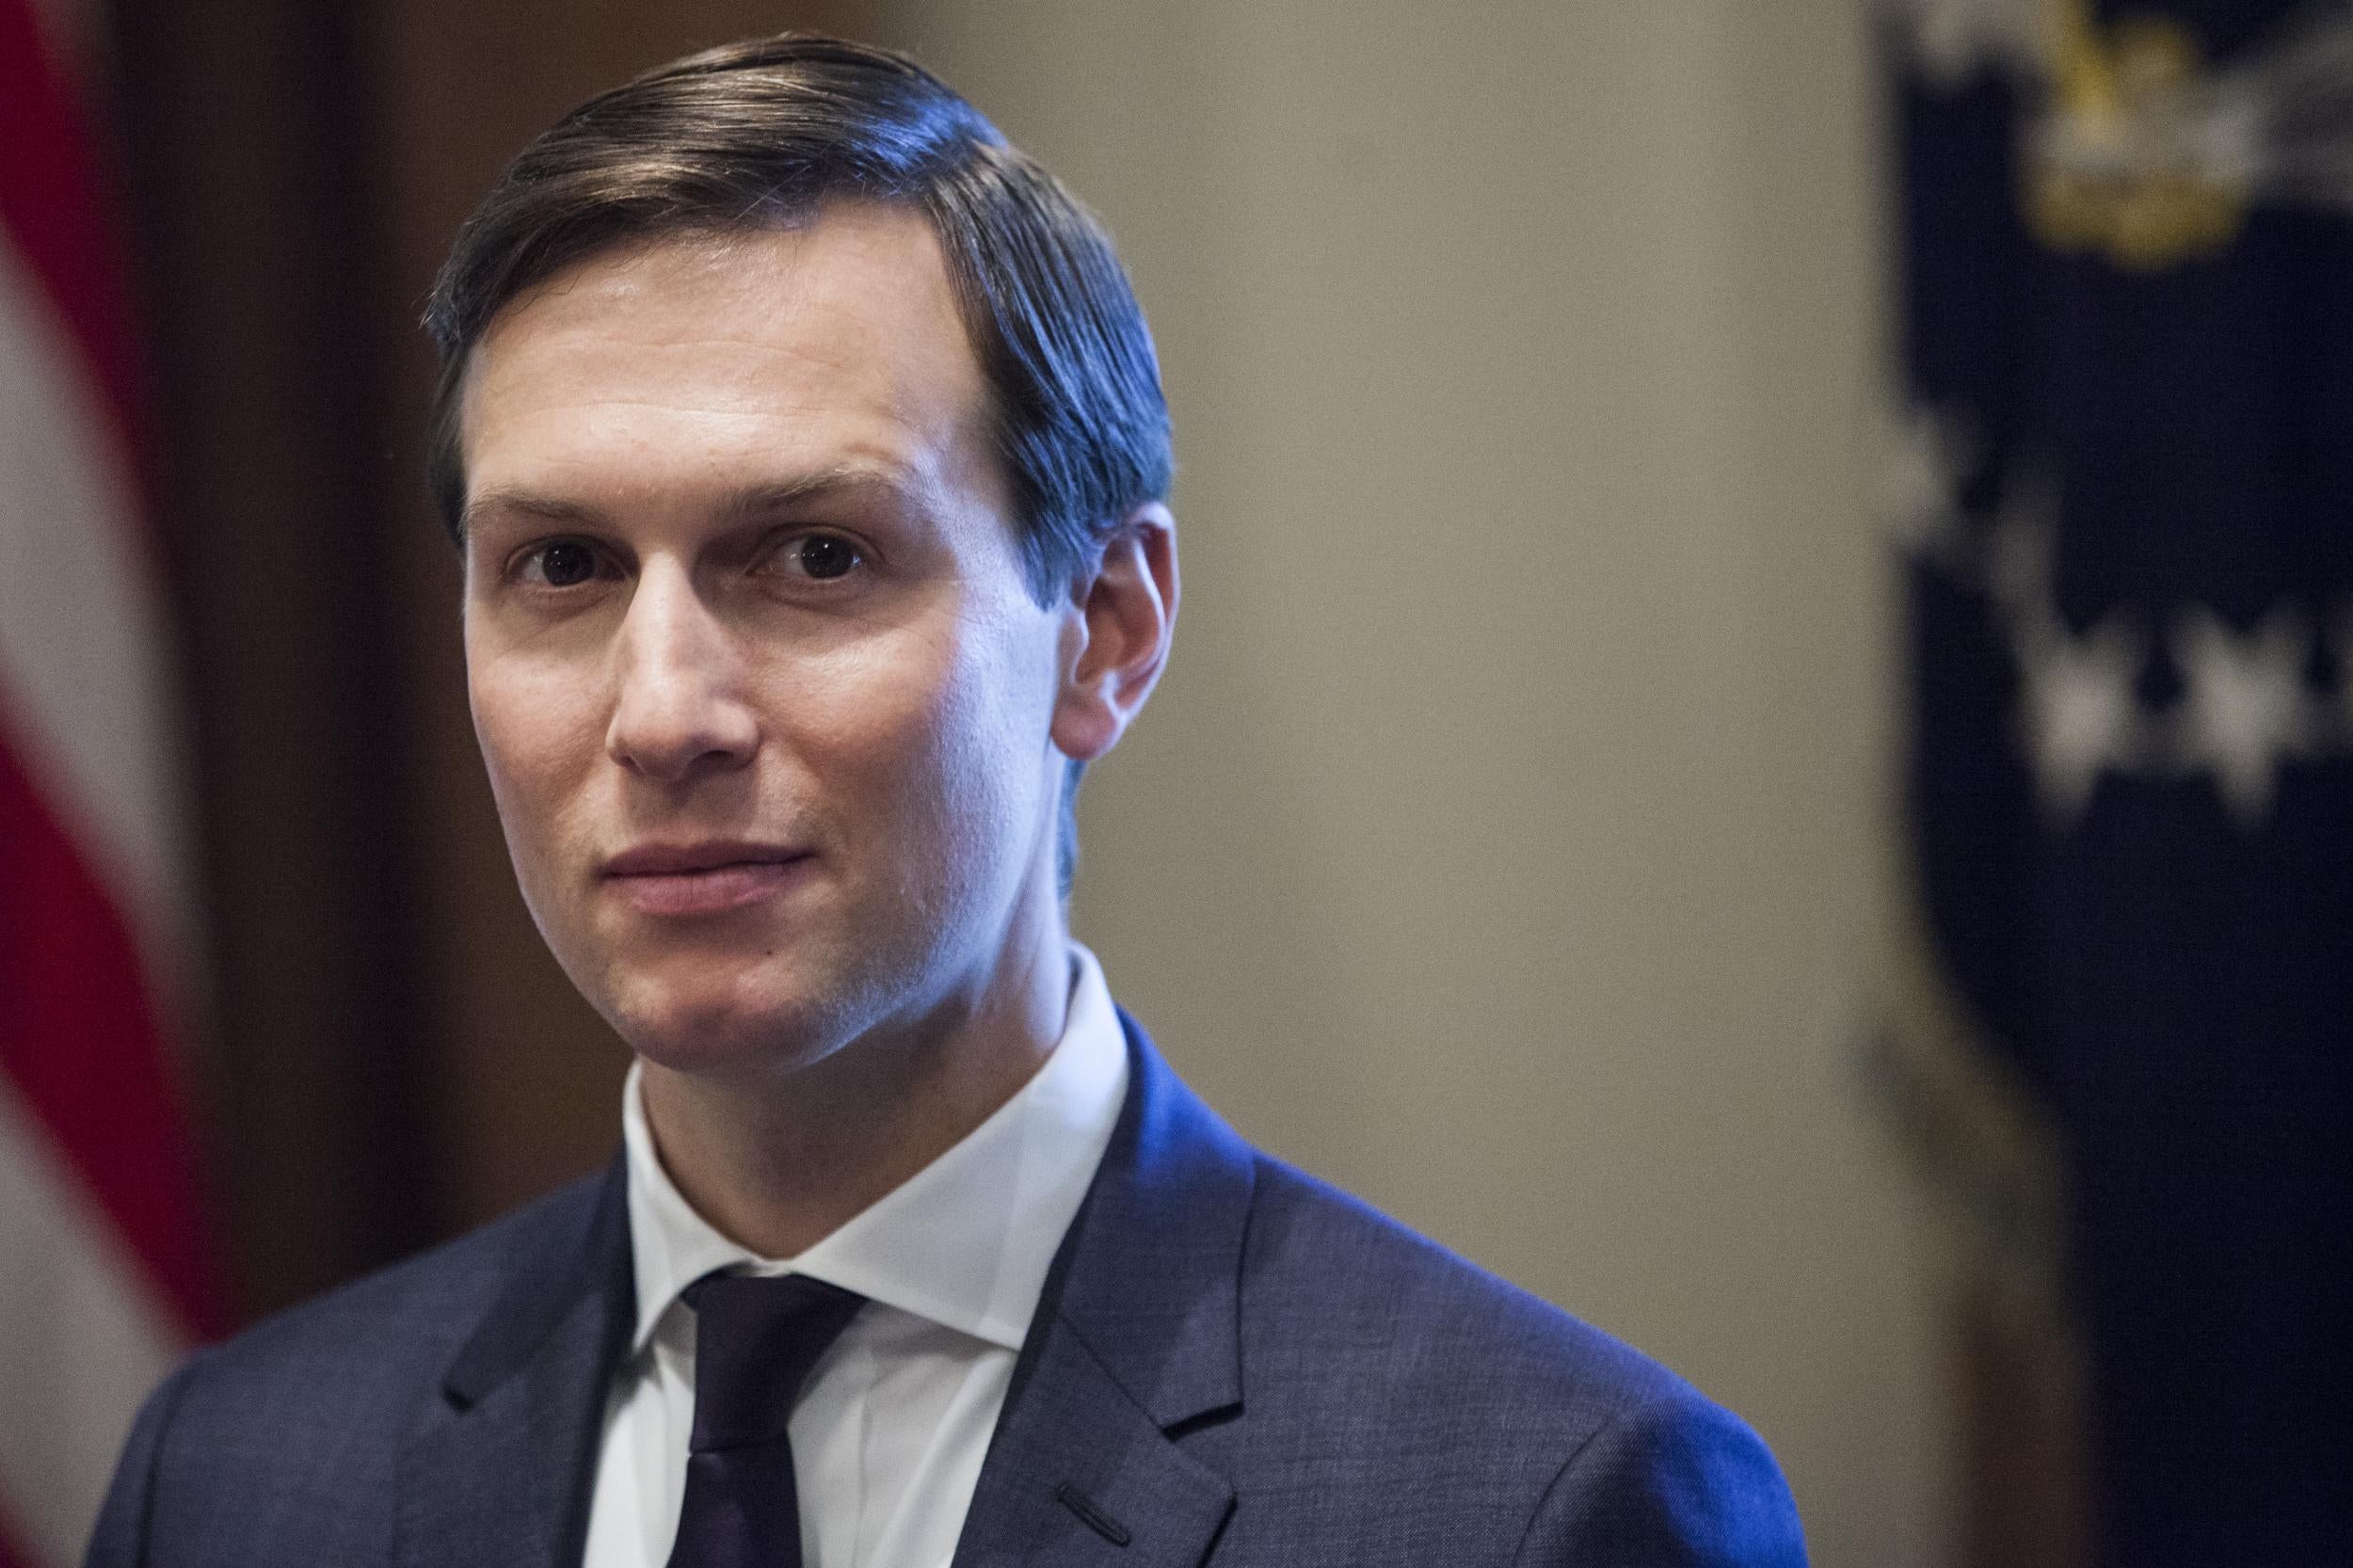 Presidential adviser and son-in-law Jared Kushner used a private email server to conduct White House business